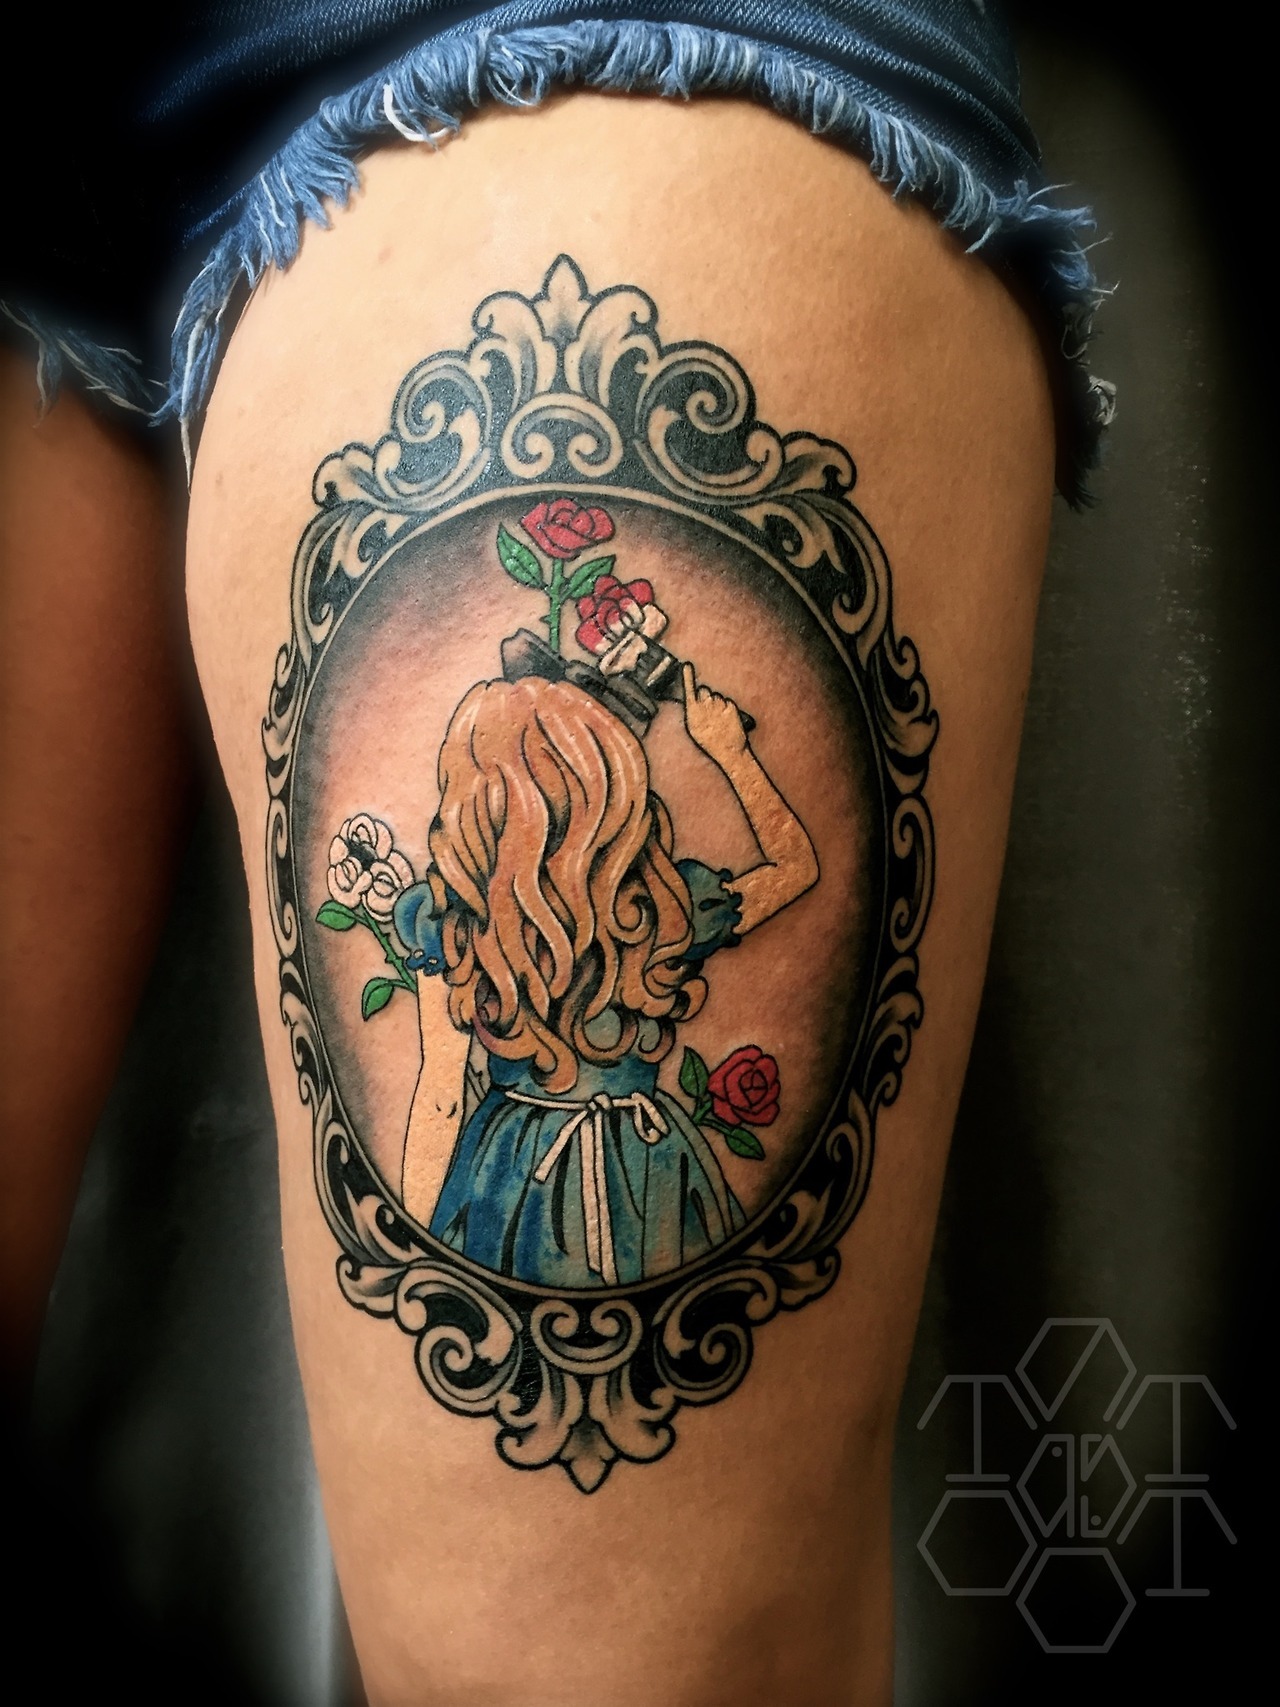 Female Heads & Portraits in Tattoo Designs | .:soulexposed:.